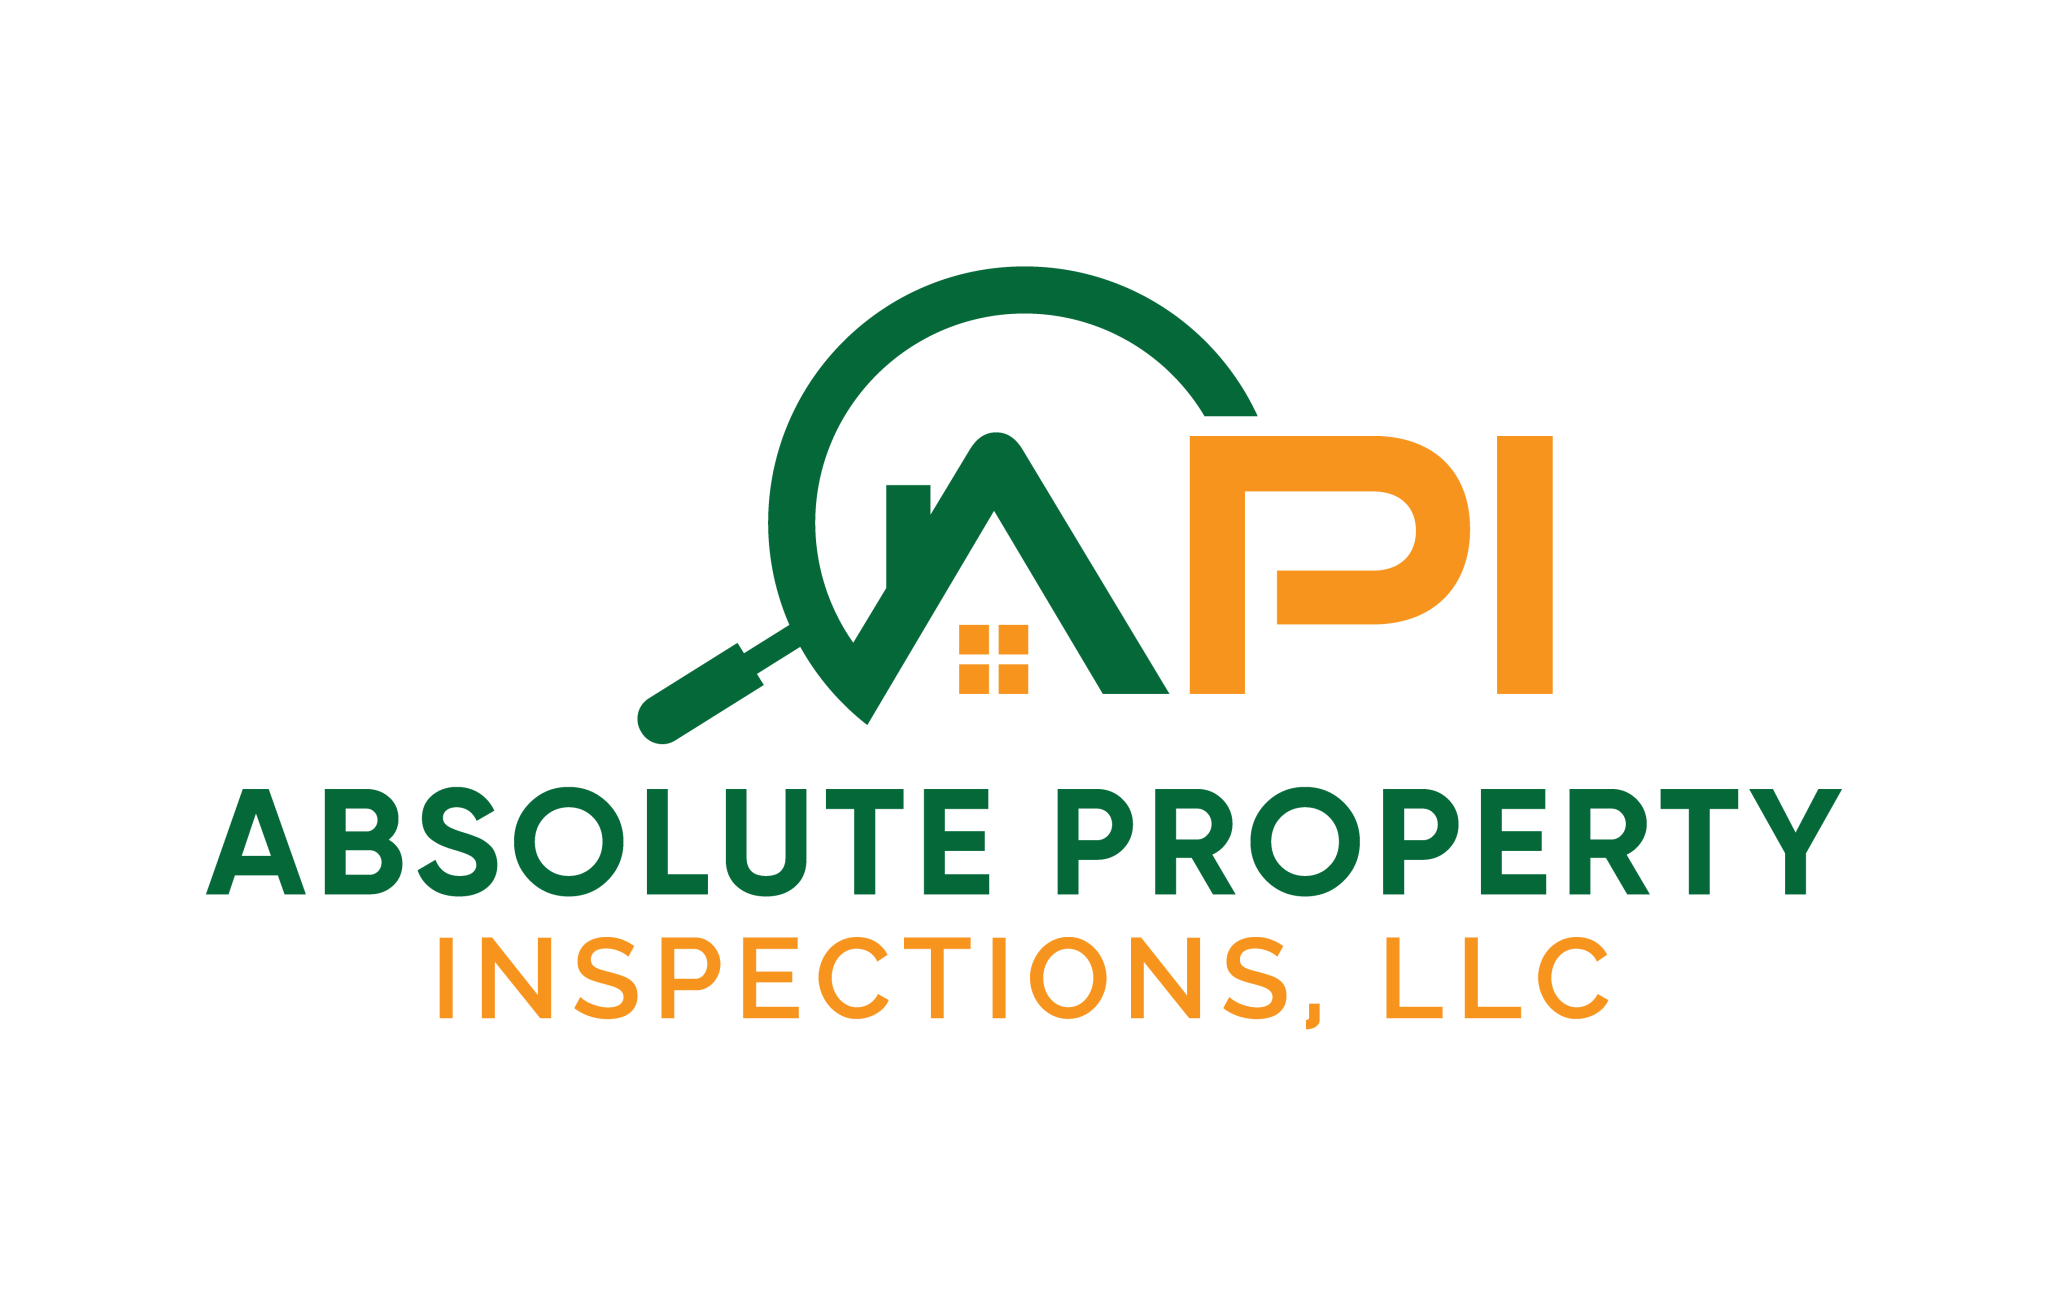 Absolute Property Inspections